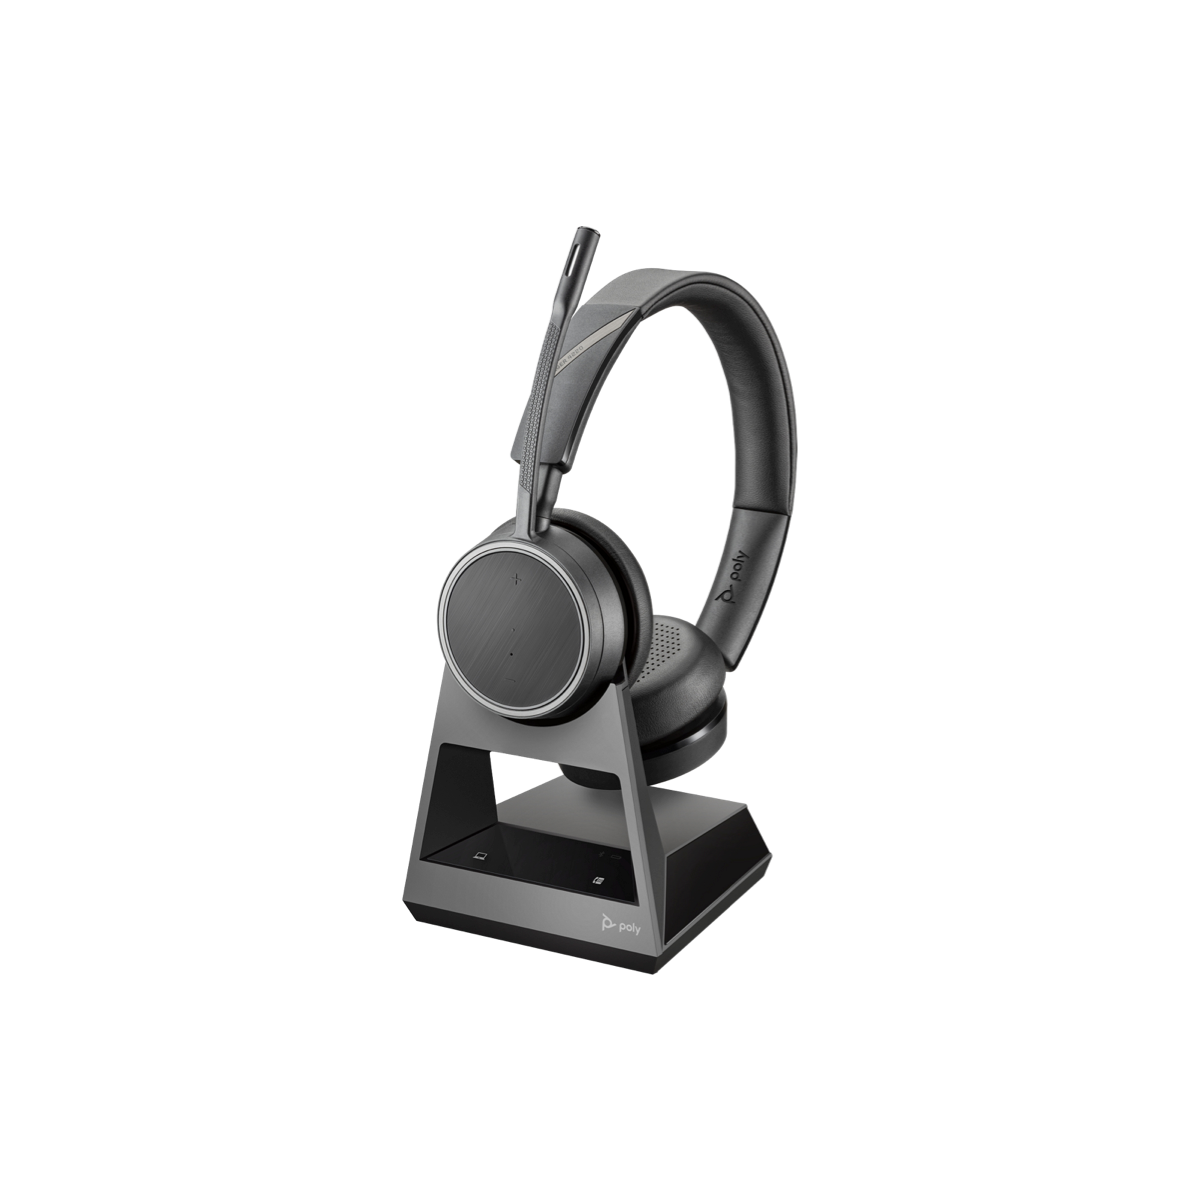 Poly VOYAGER 4220 UC , Blutooth 5.0 Wireless Stereo Headset